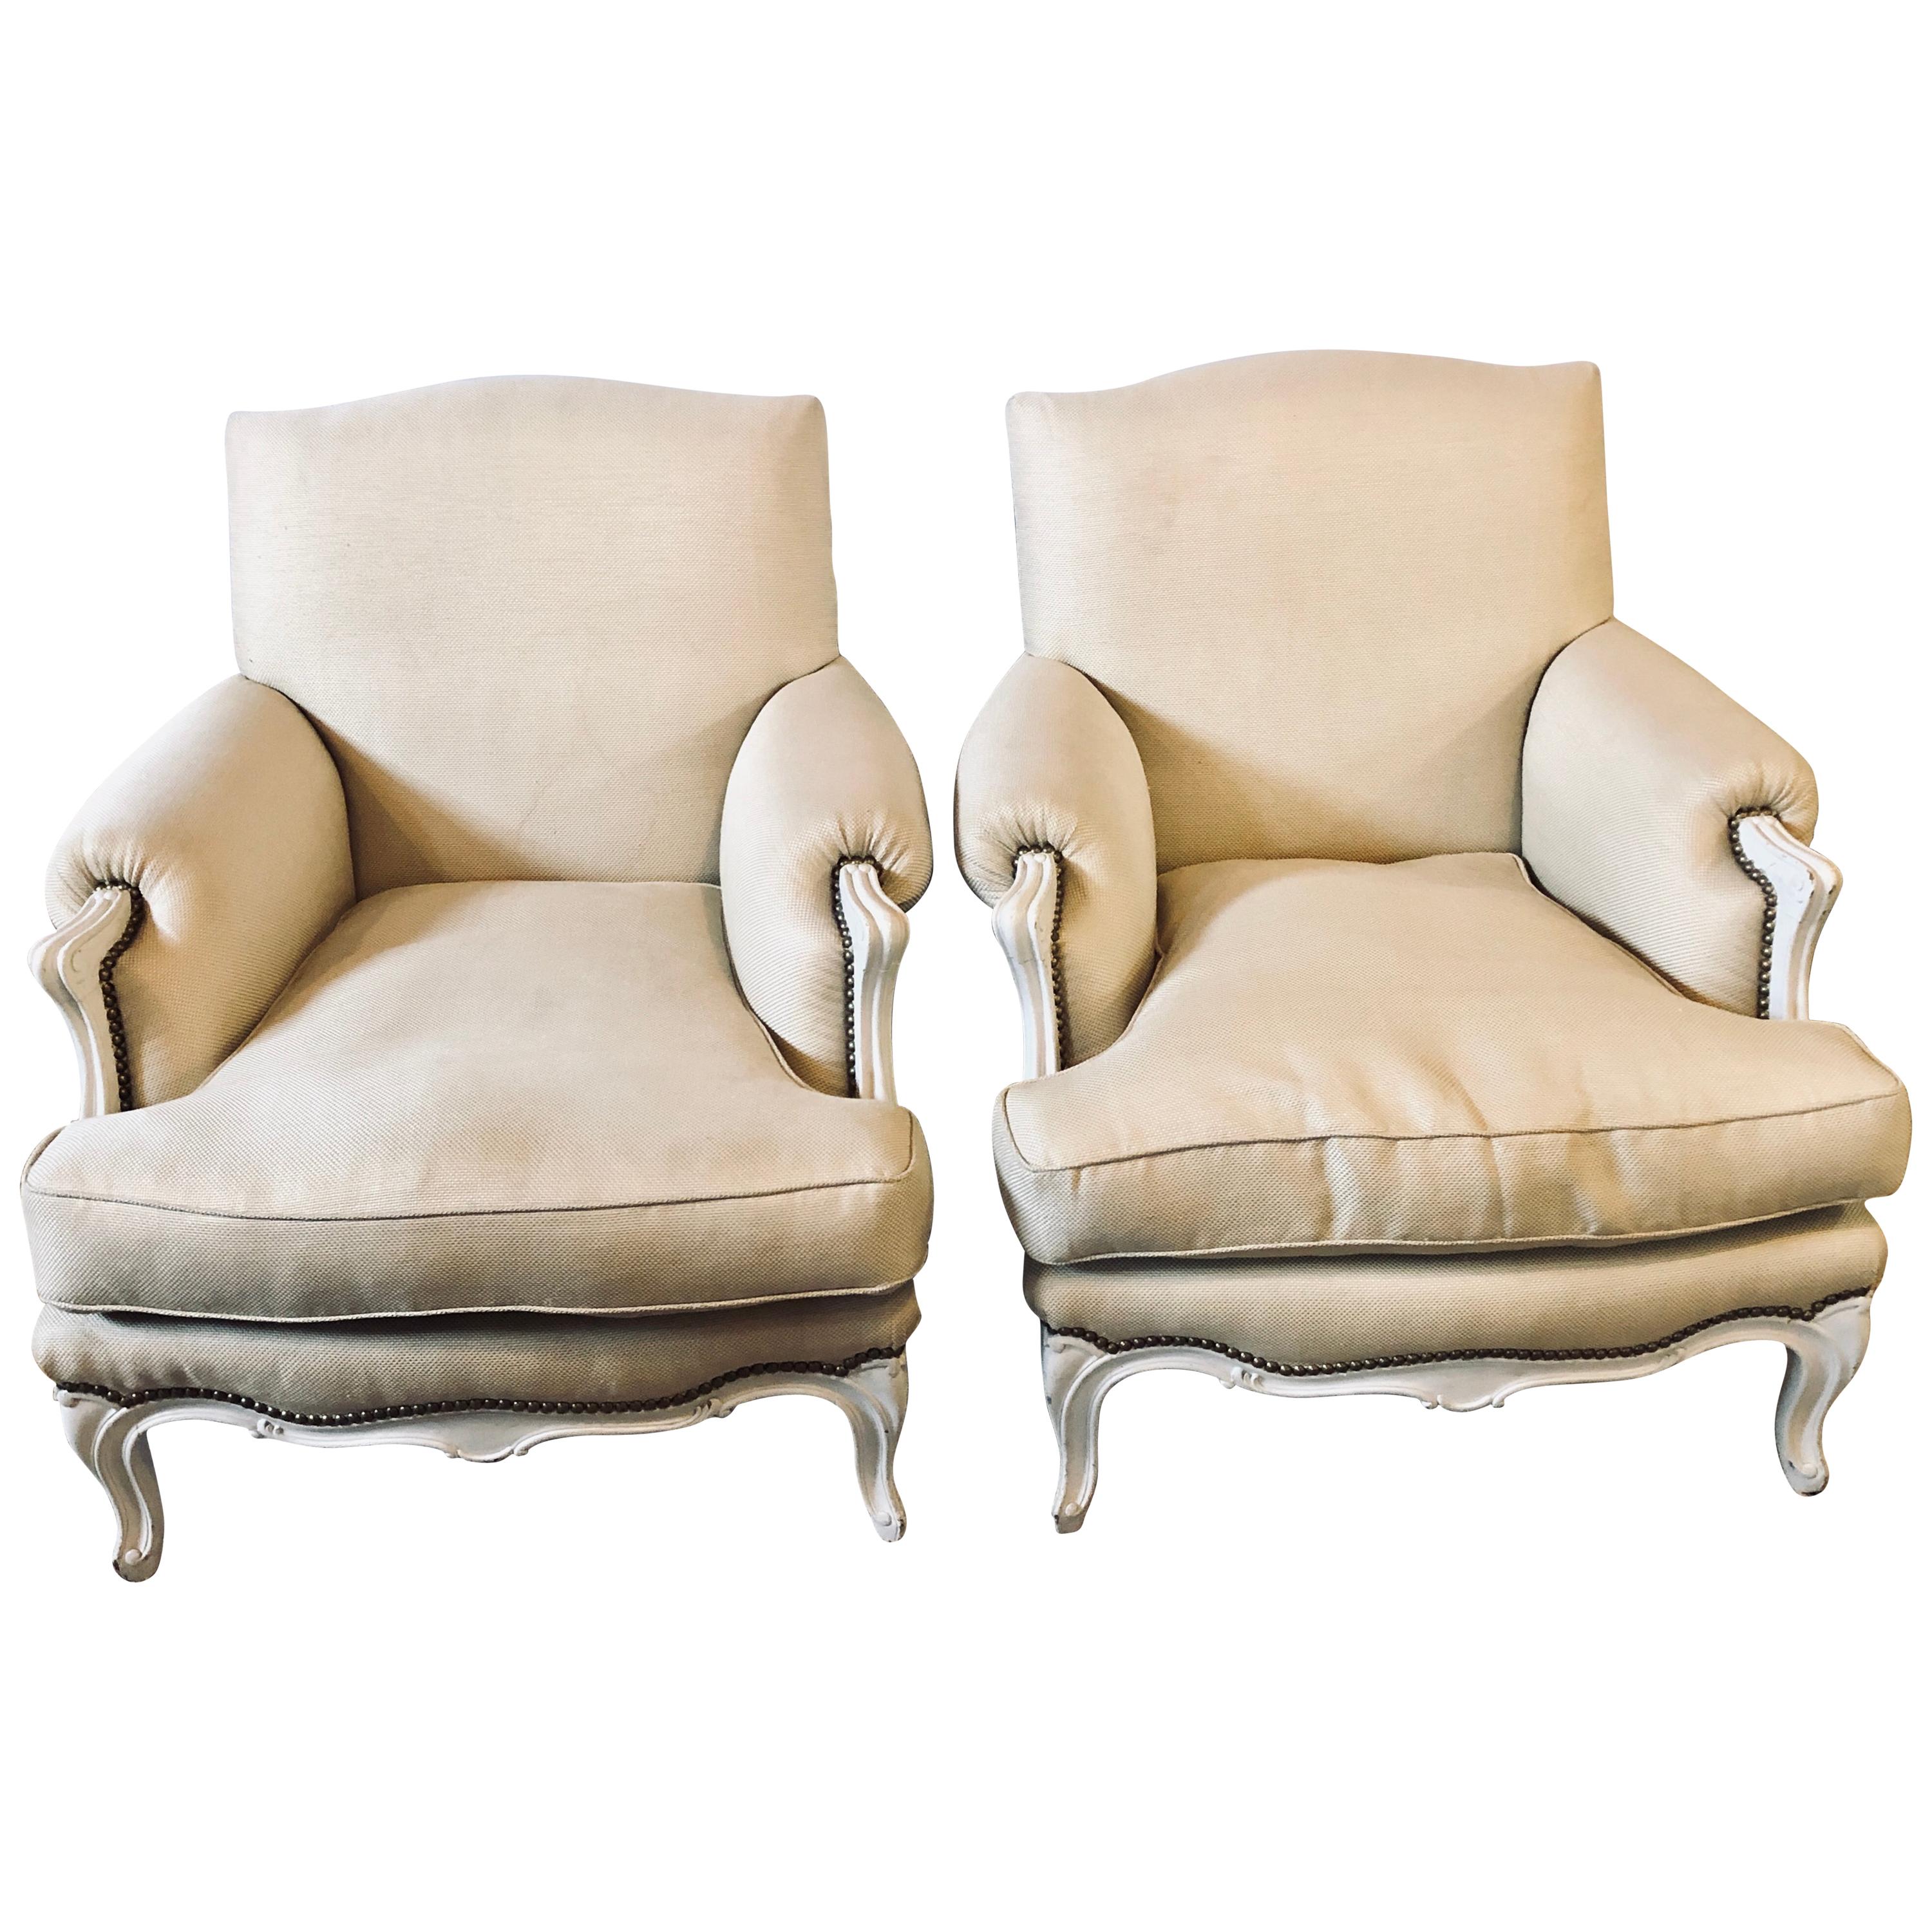 Pair of Hollywood Regency Louis XV Style Linen Bergere / Arm or Club Chairs